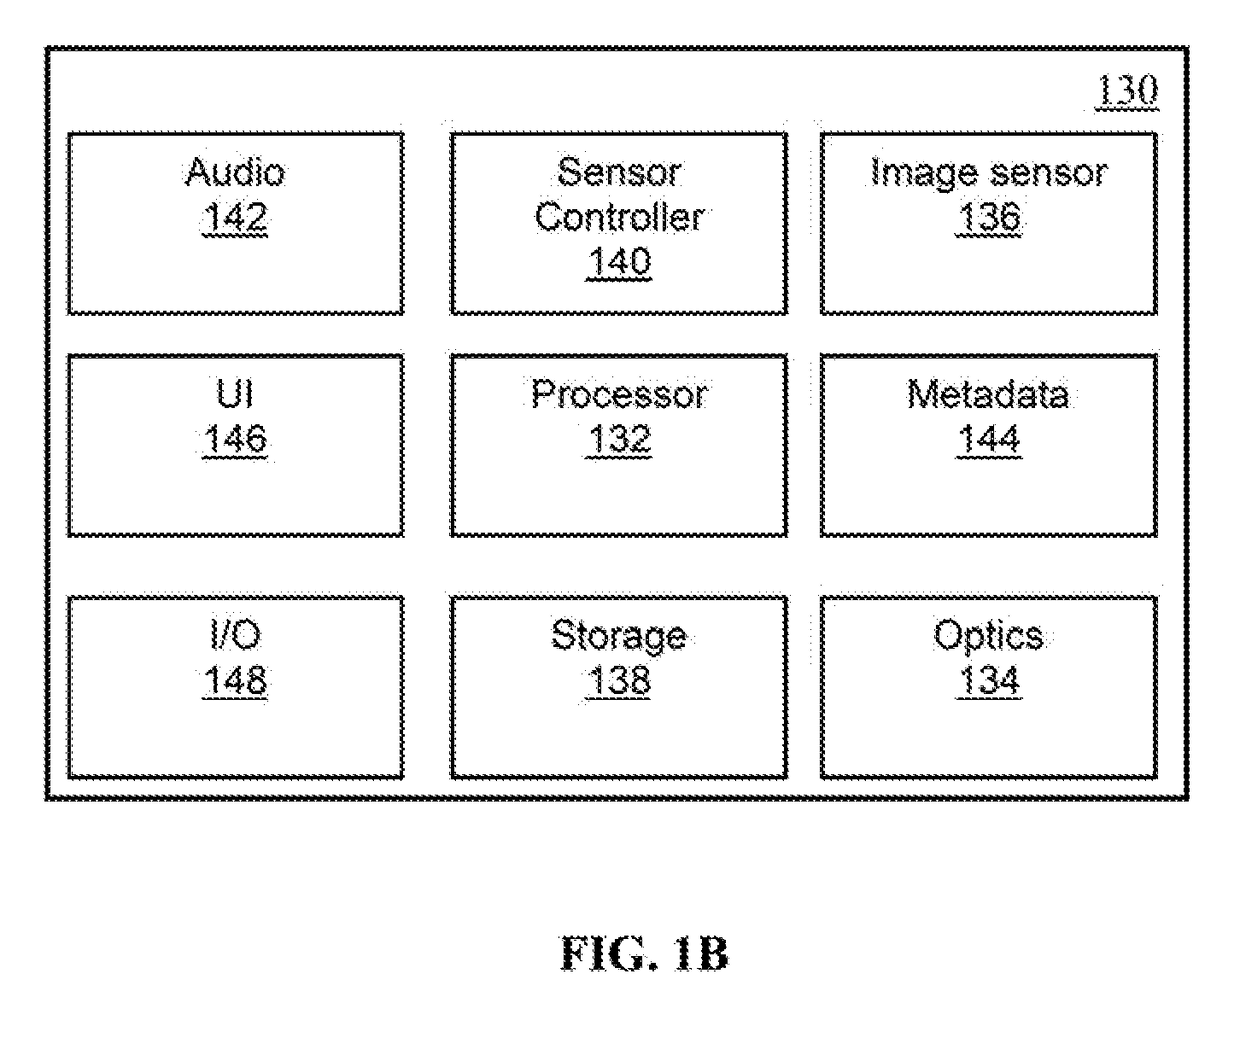 Apparatus and methods for video compression using multi-resolution scalable coding